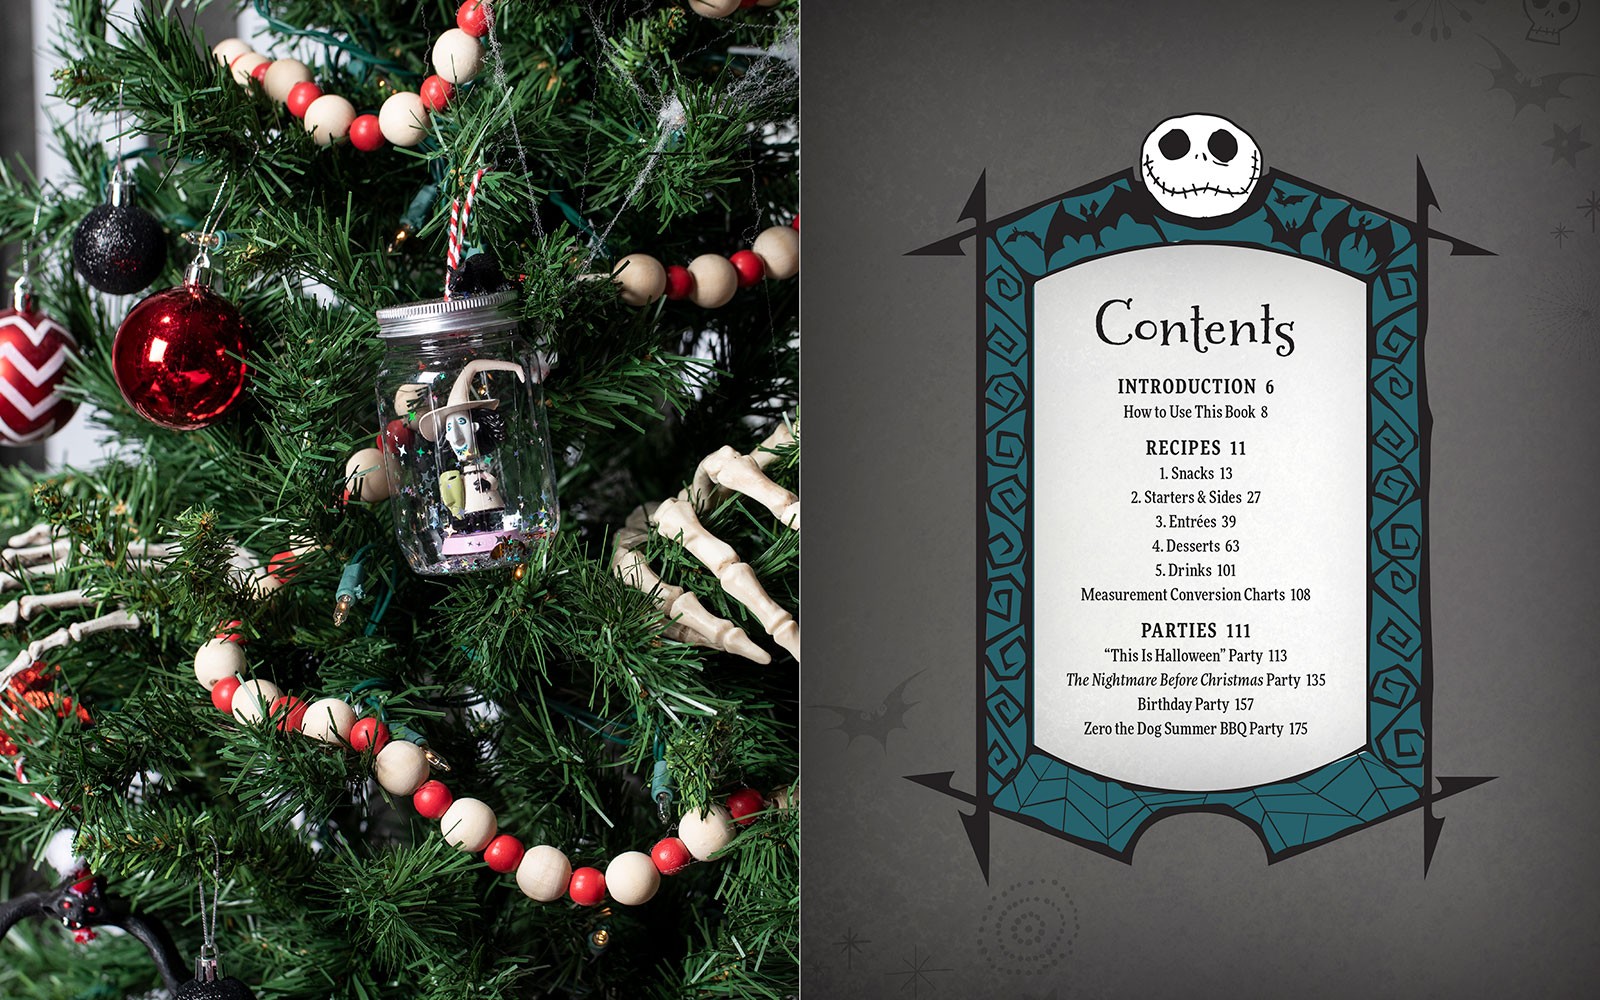 The Nightmare Before Christmas: The Official Cookbook & Entertaining Guide- Prototype Shown